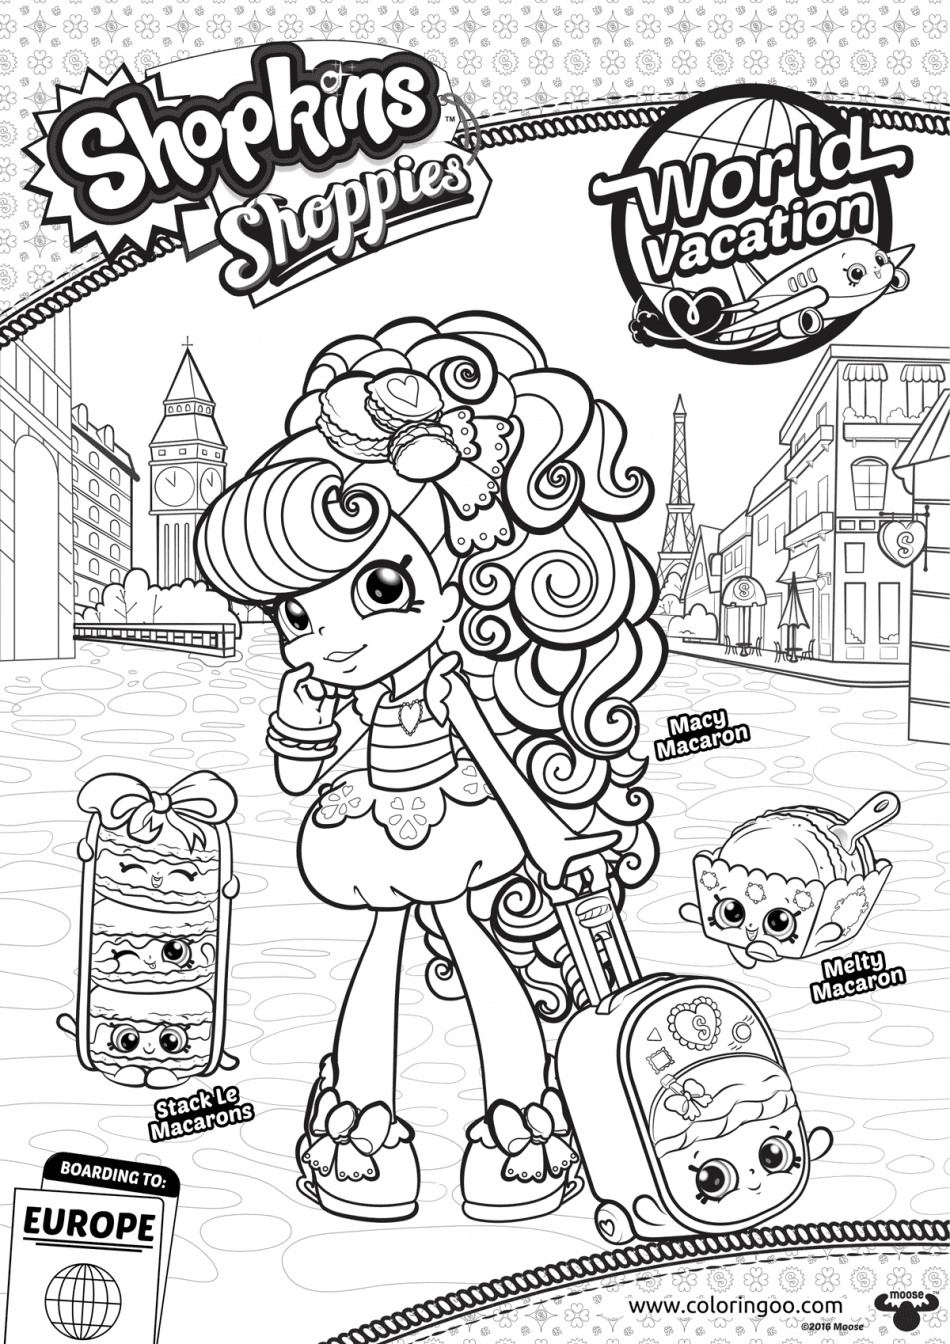 Shopkins Shoppies Macy Macaron Coloring Pages